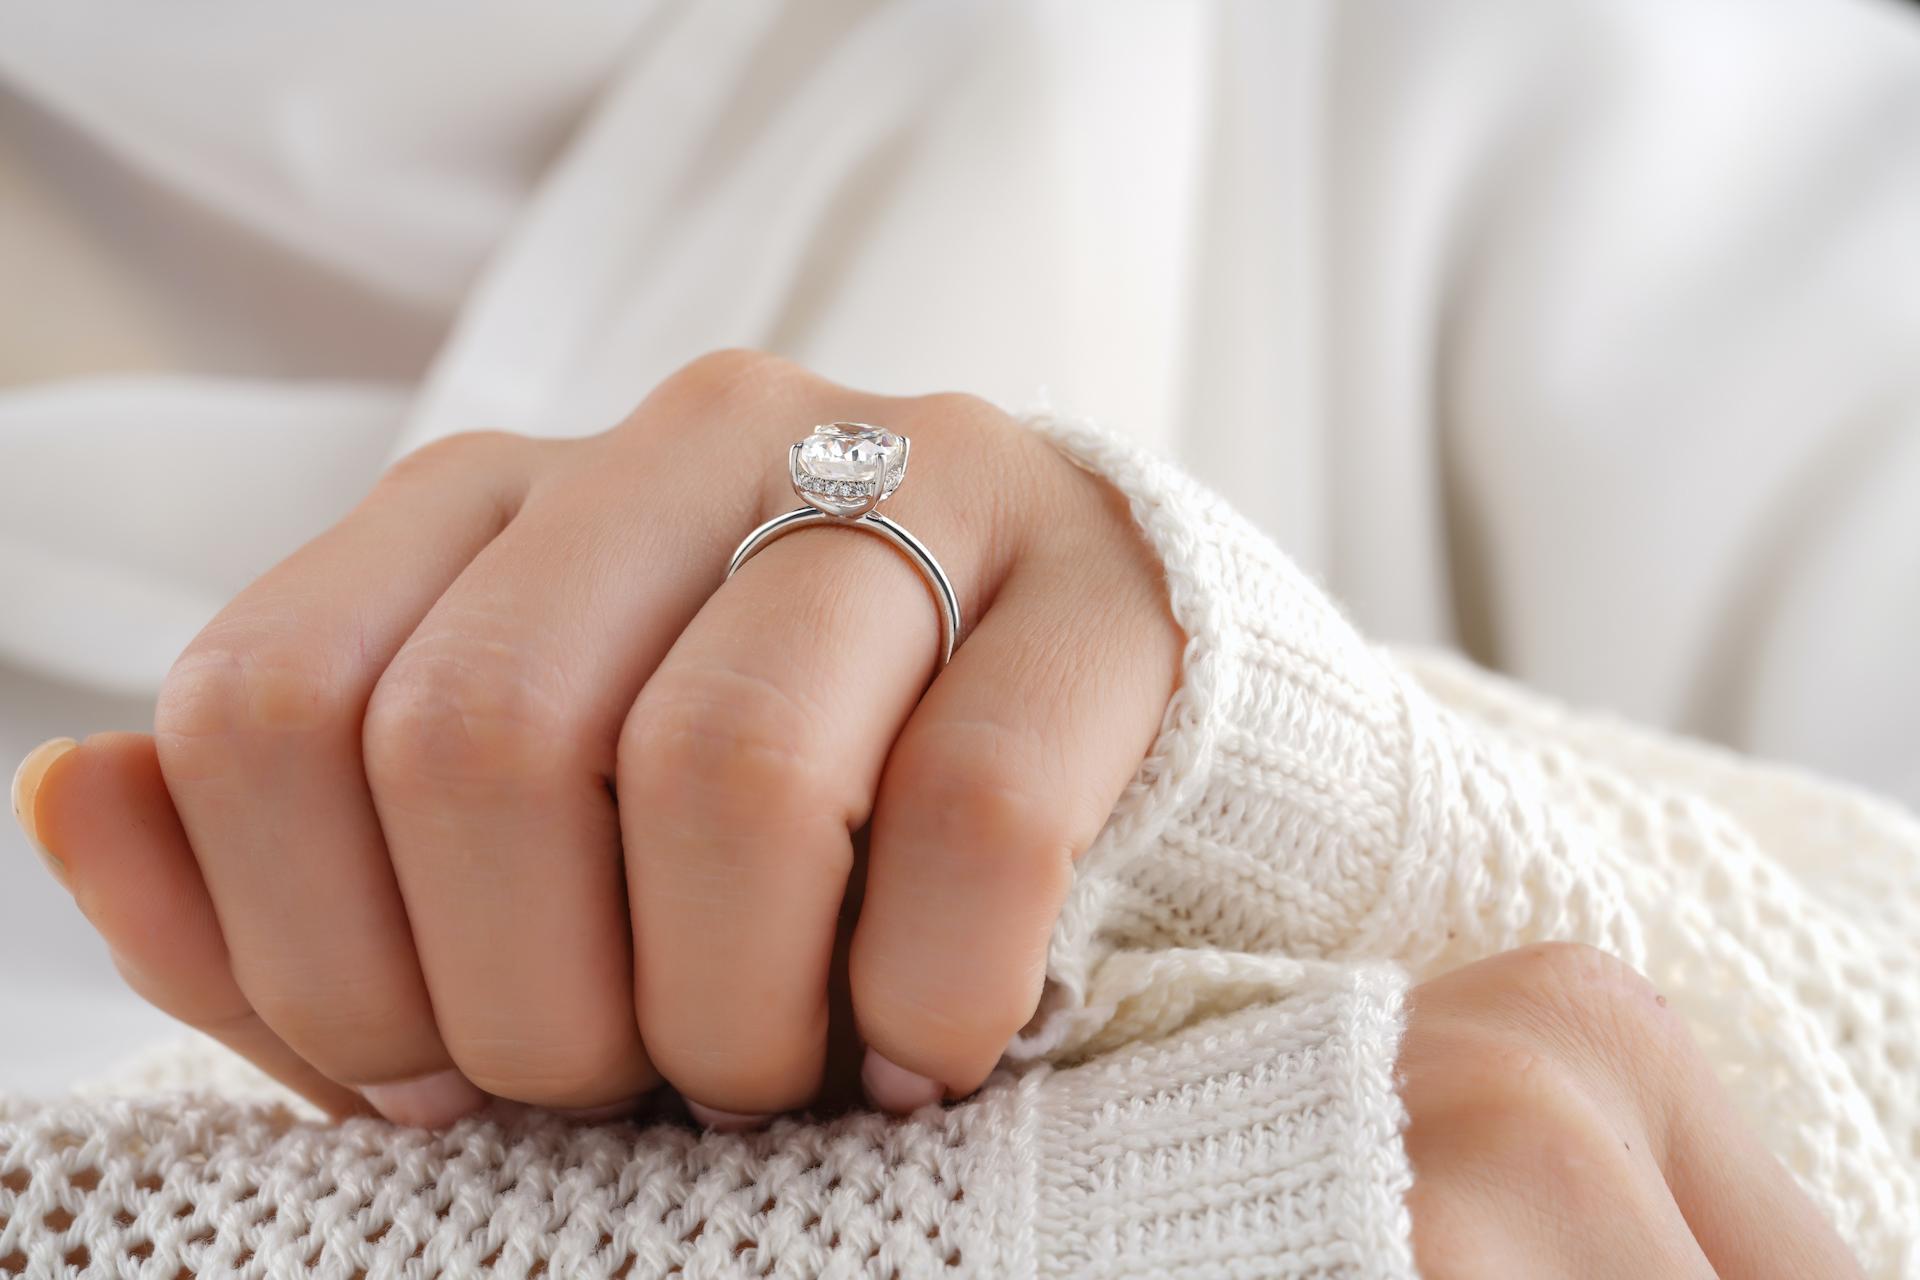 A Simple Checklist For Purchasing Her Favorite Engagement Rings